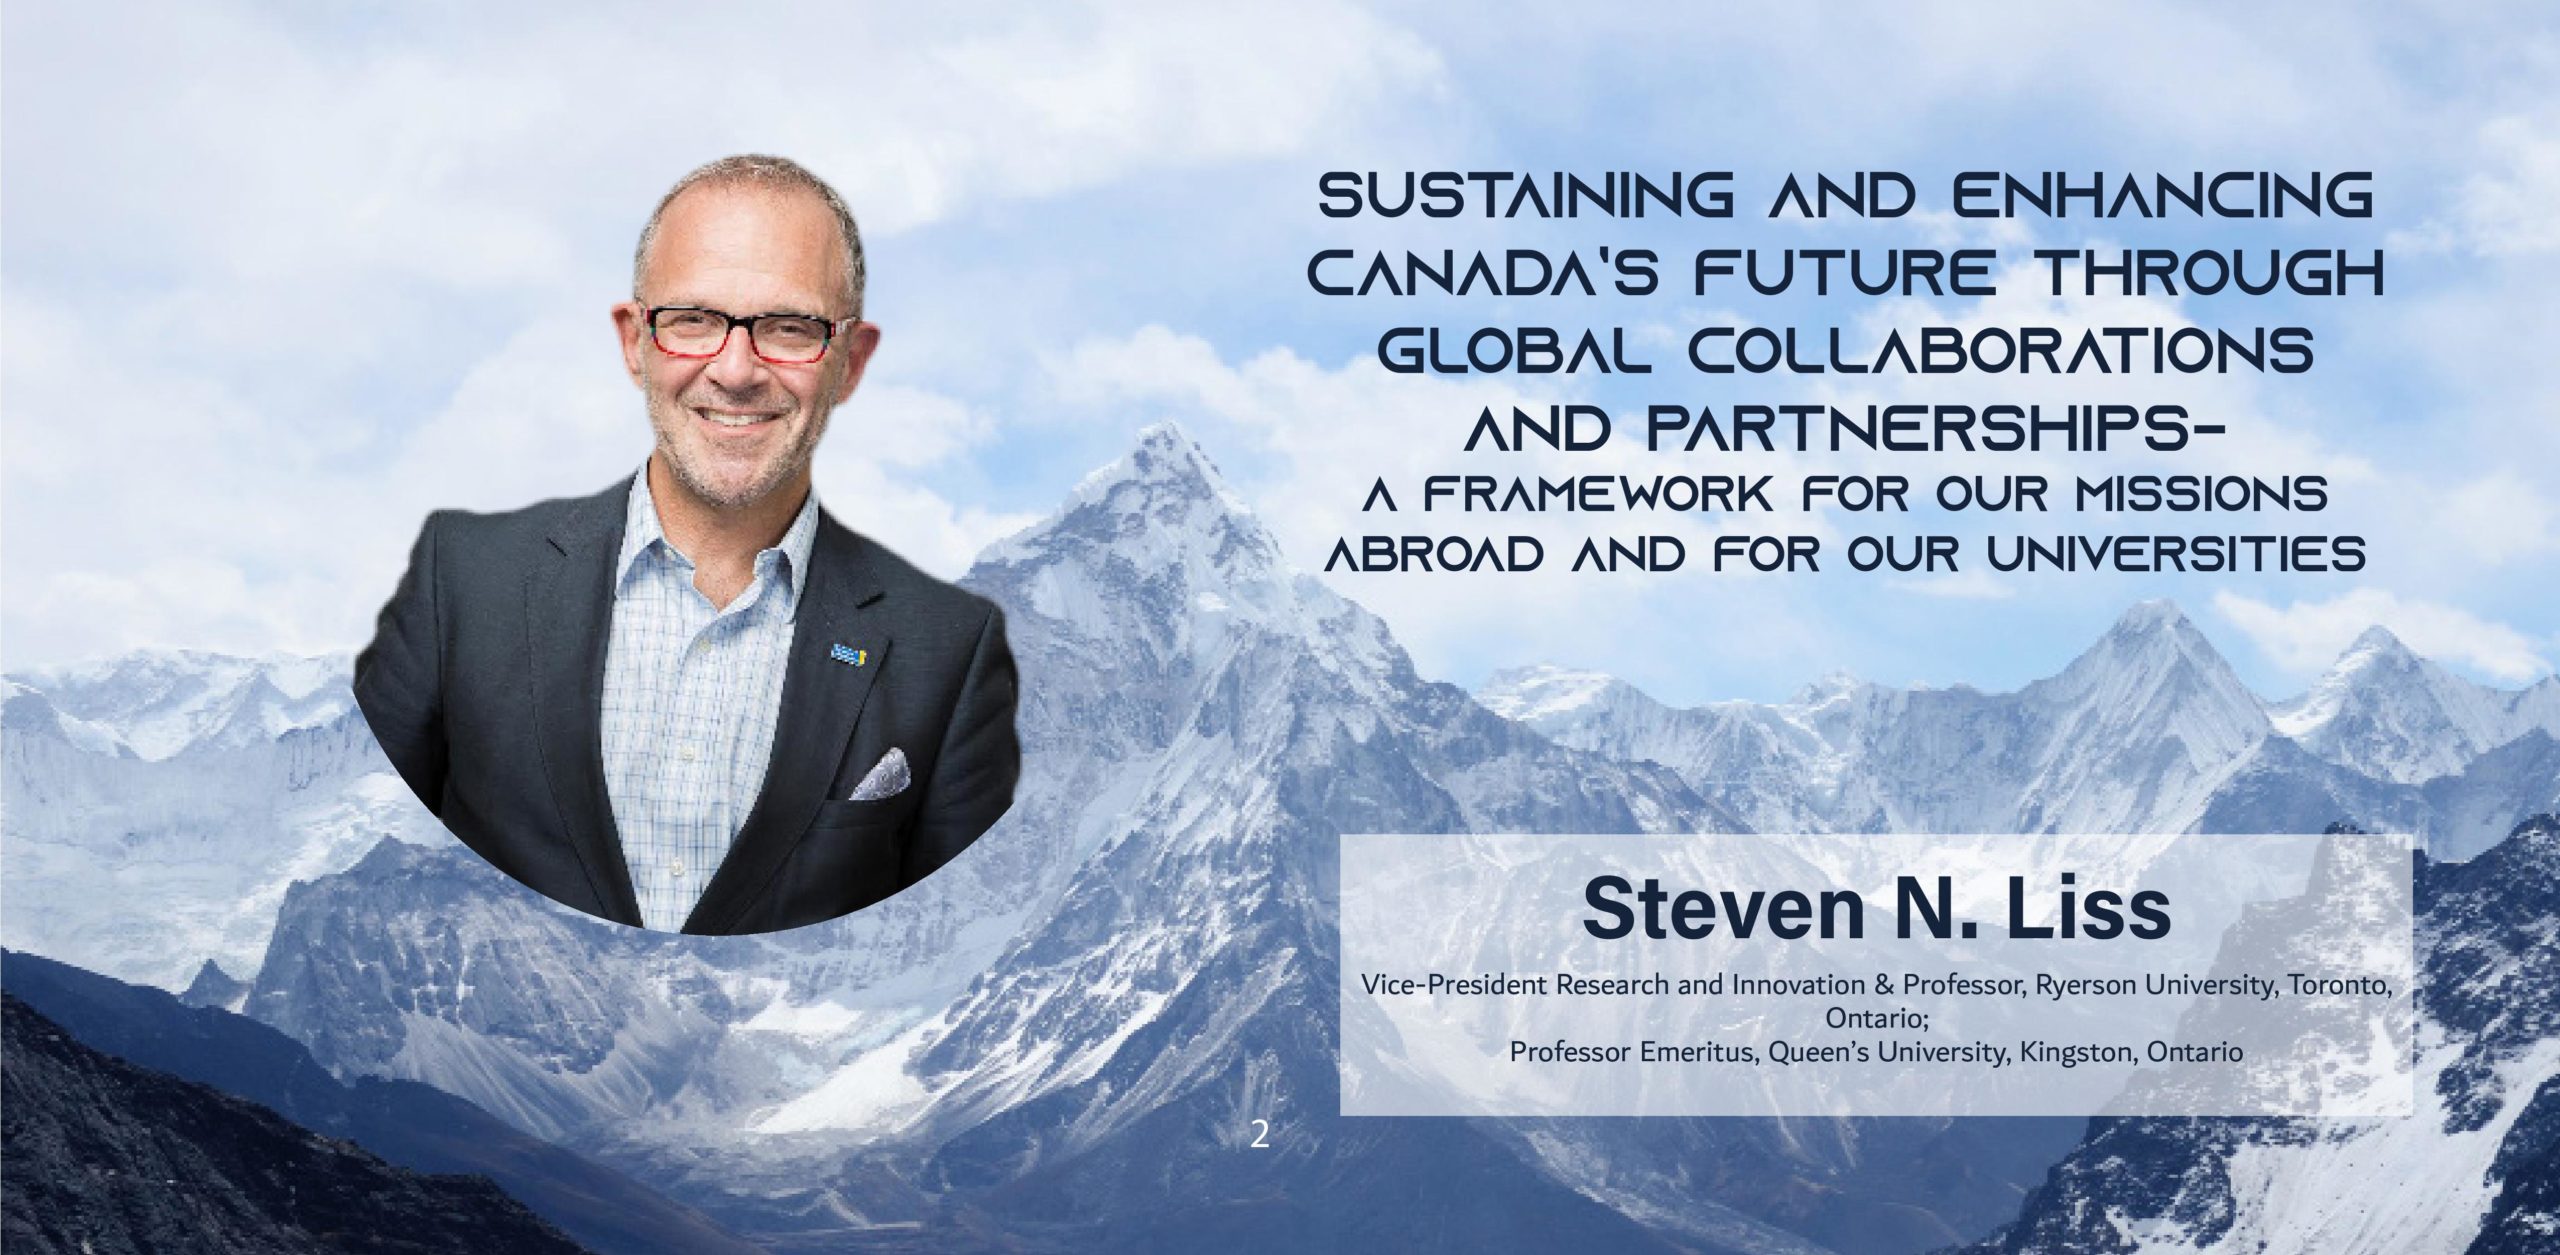 A picture of a man over a snowy mountainscape with the text: Sustaining and Enhancing Canada’s Future through Global Collaborations and Partnerships-A Framework for our Missions Abroad and for our Universities Steven N Liss Ryerson University, Toronto, Ontario Vice-President Research and Innovation & Professor Queen’s University, Kingston, Ontario Professor Emeritus